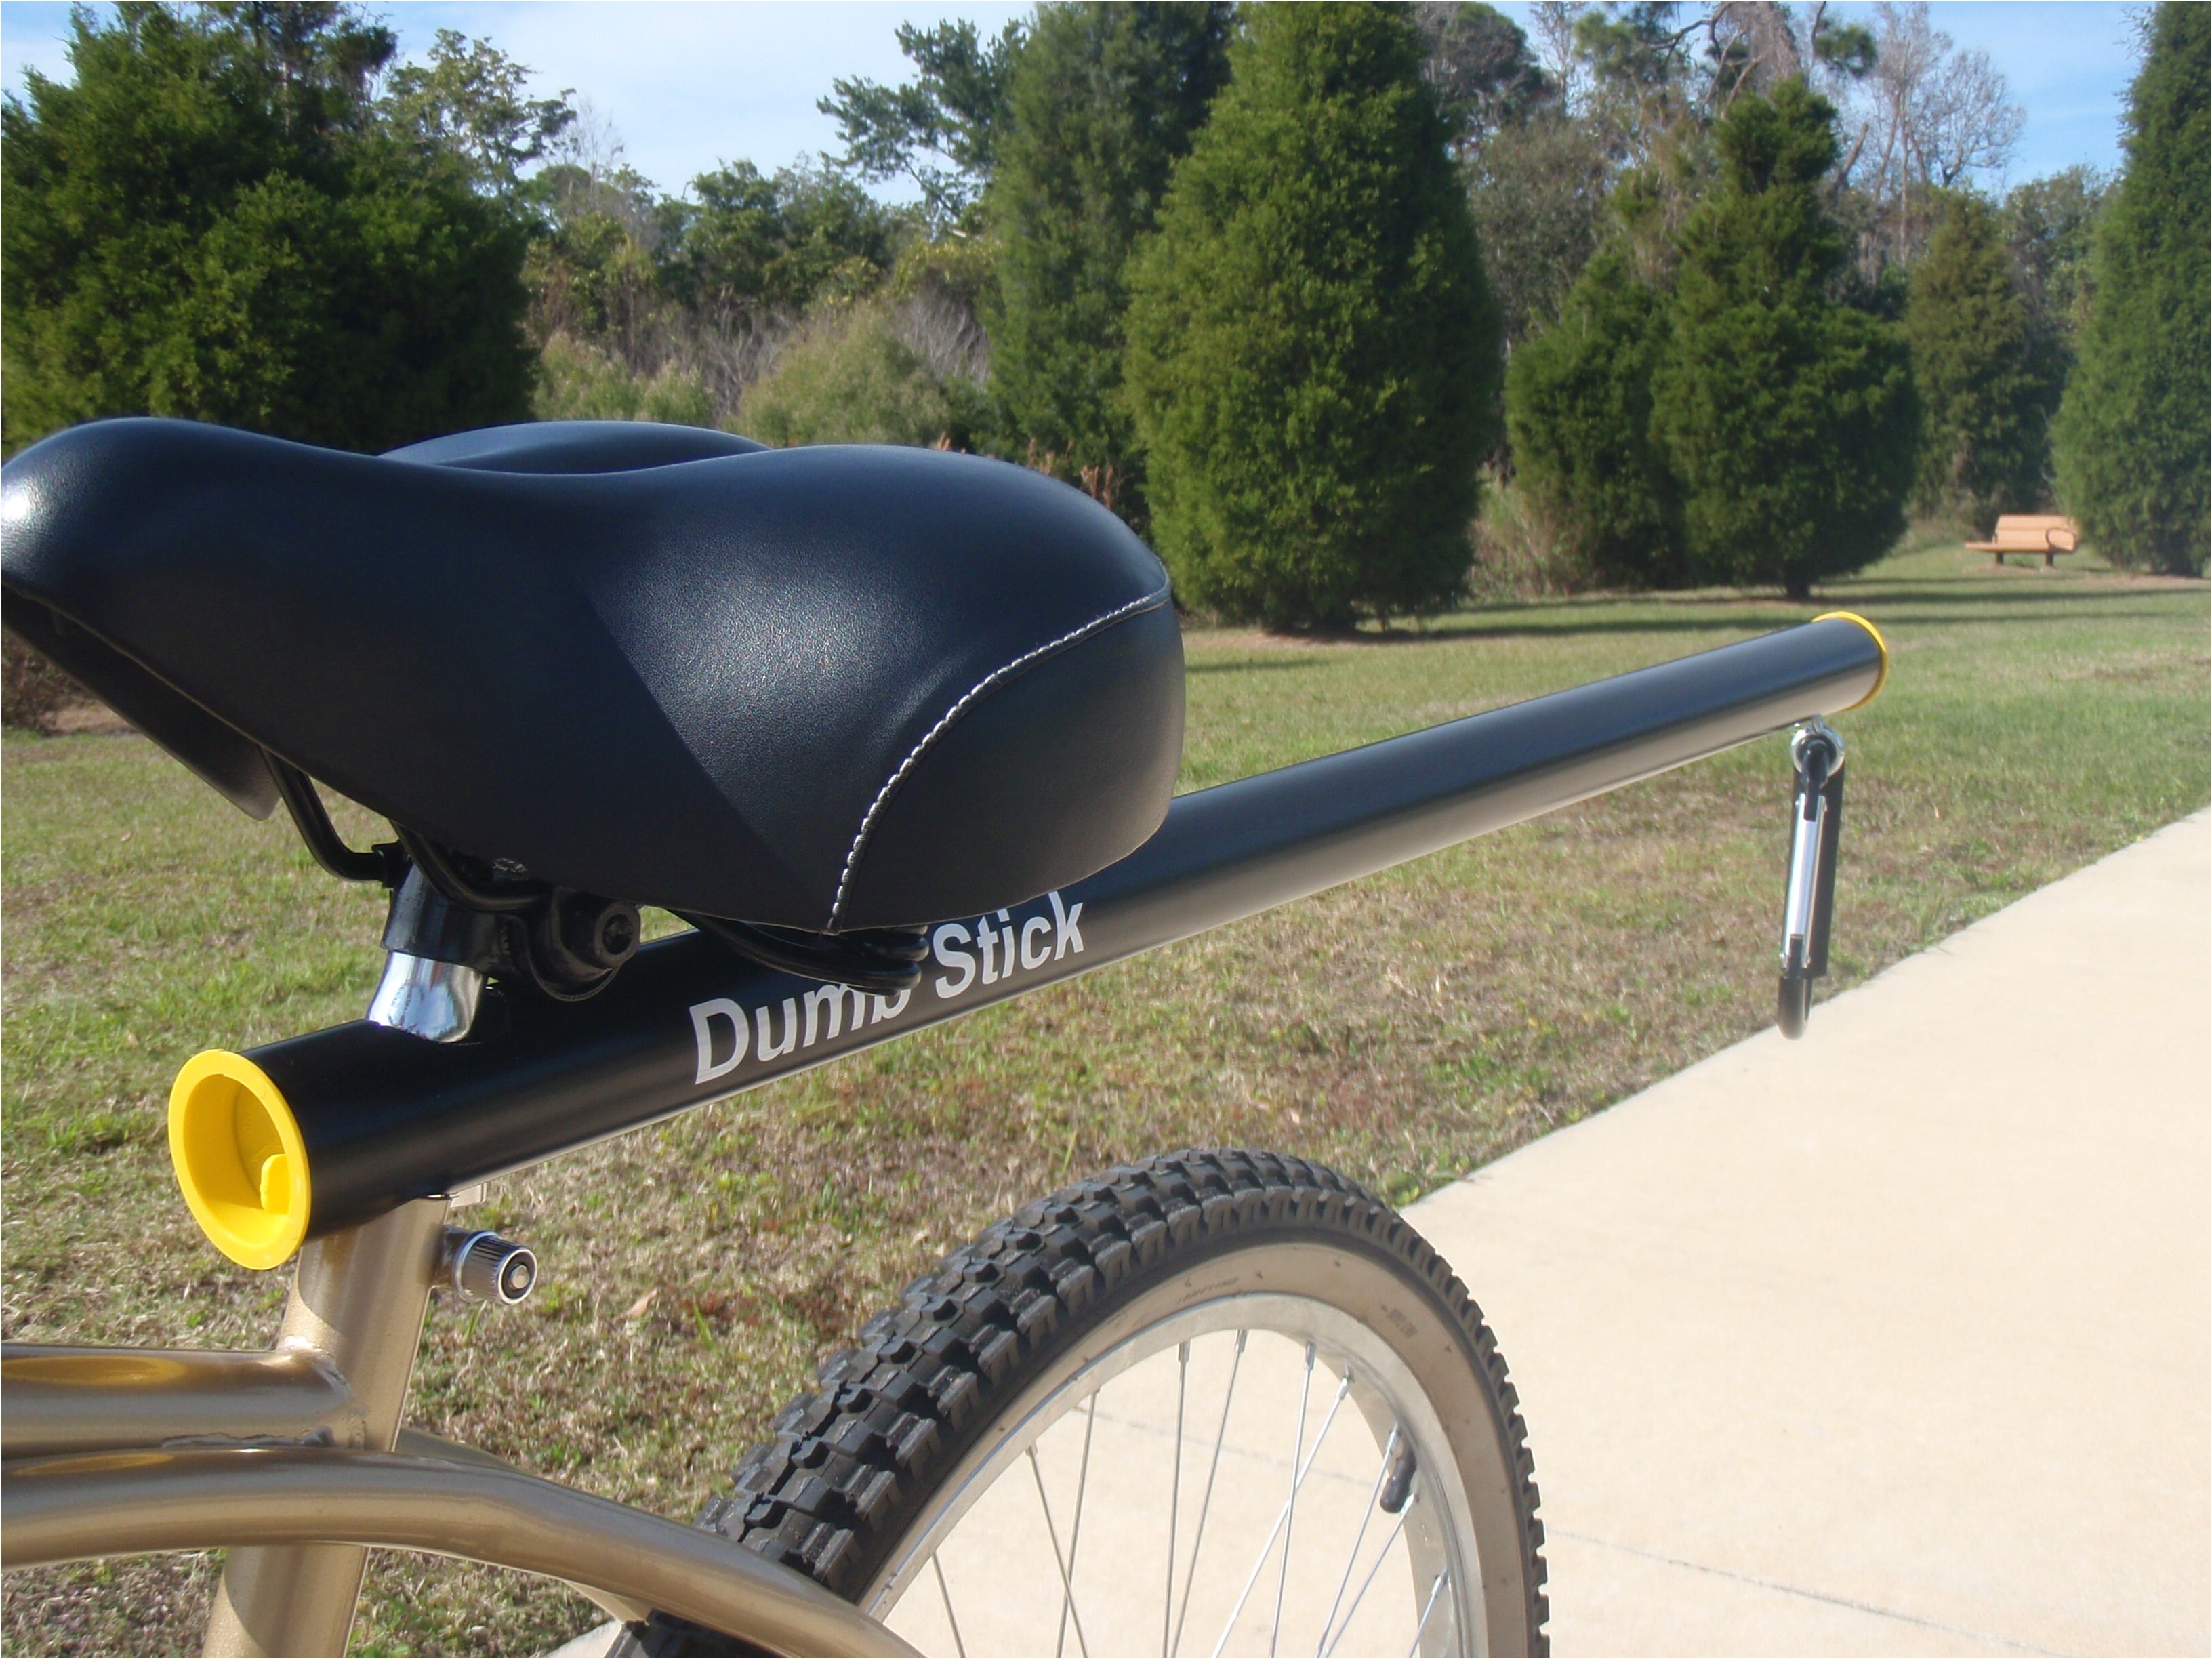 www dumb stick com bicycle tow bar for towing your kayak canoe grocery cart or golf clubs behind your bicycle